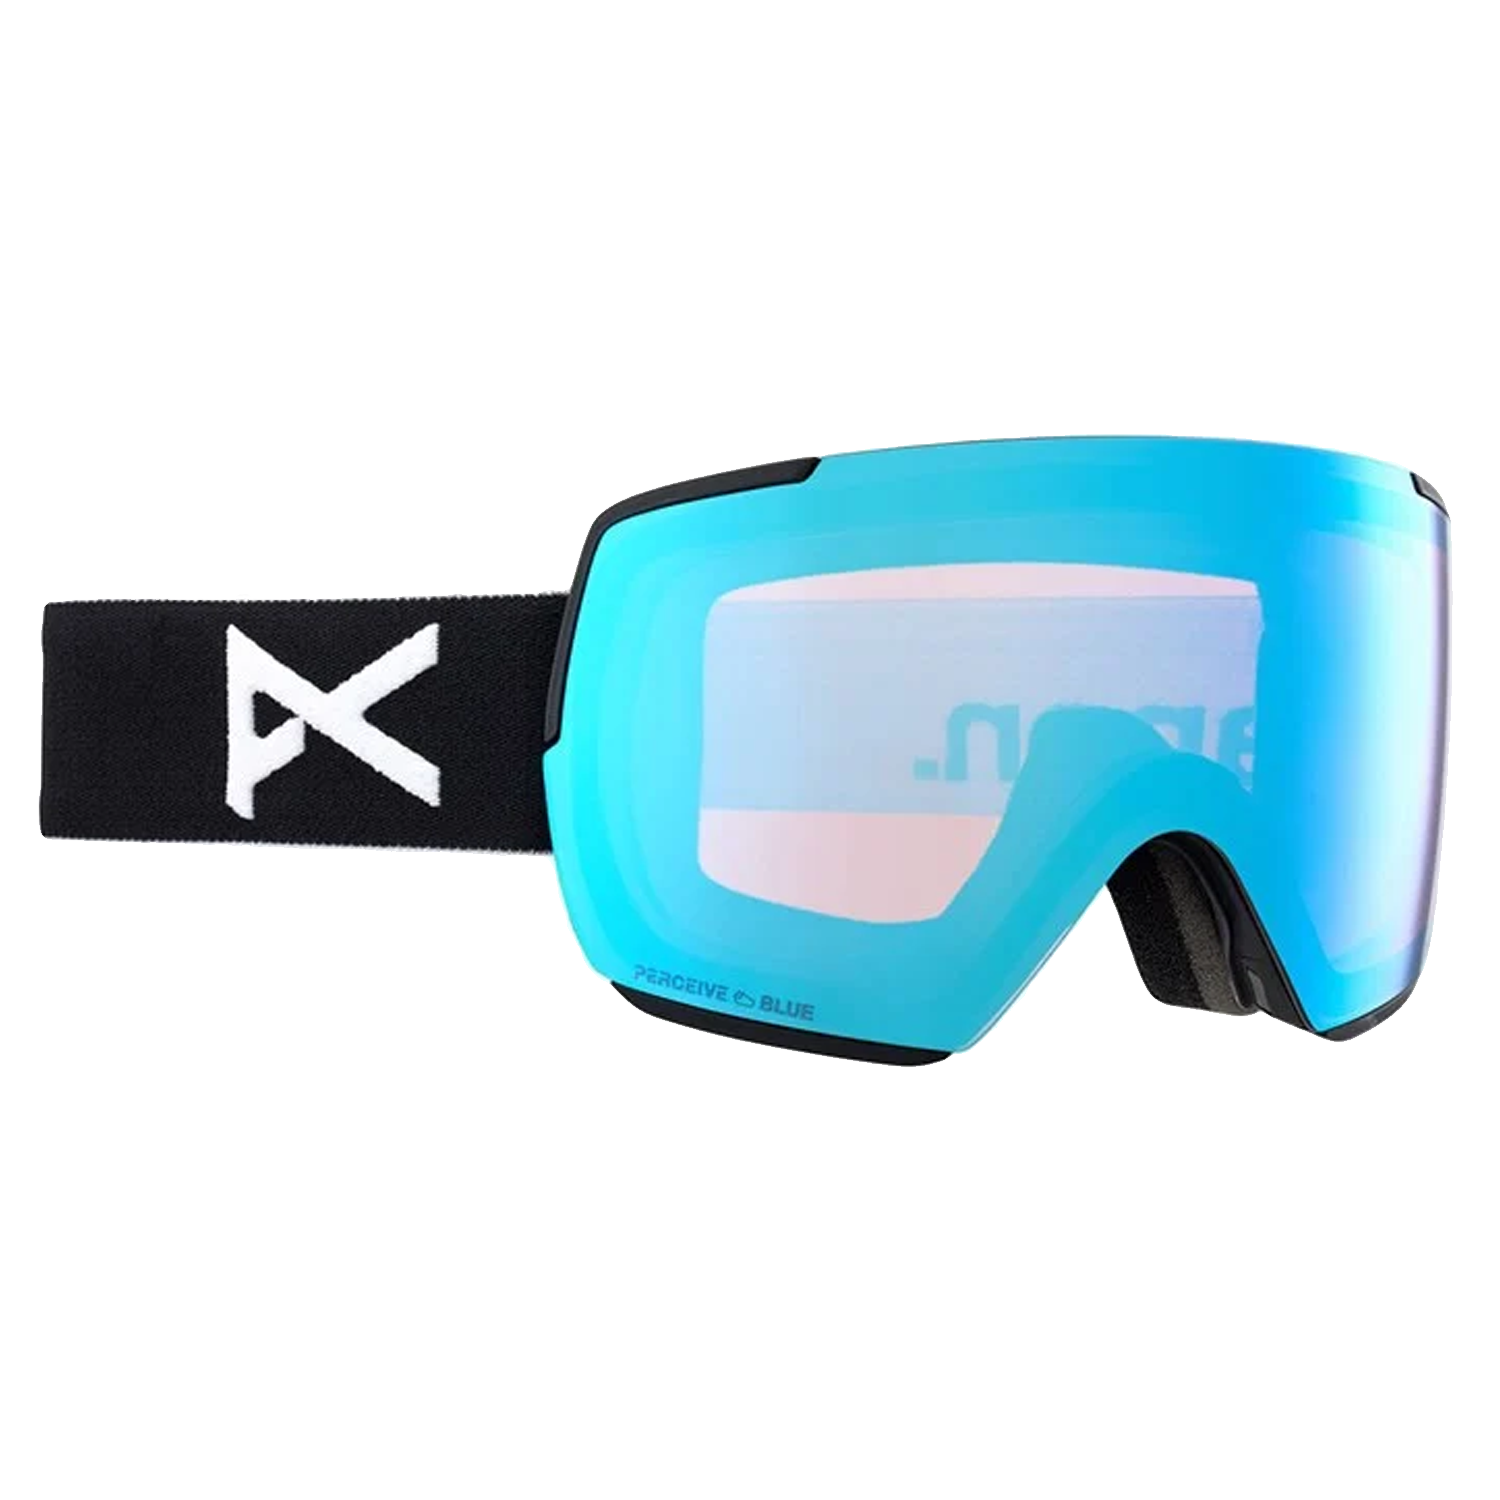 Anon M5S Low Bridge Fit Goggles Black/Perceive Variable Blue + Perceive  Cloudy Pink